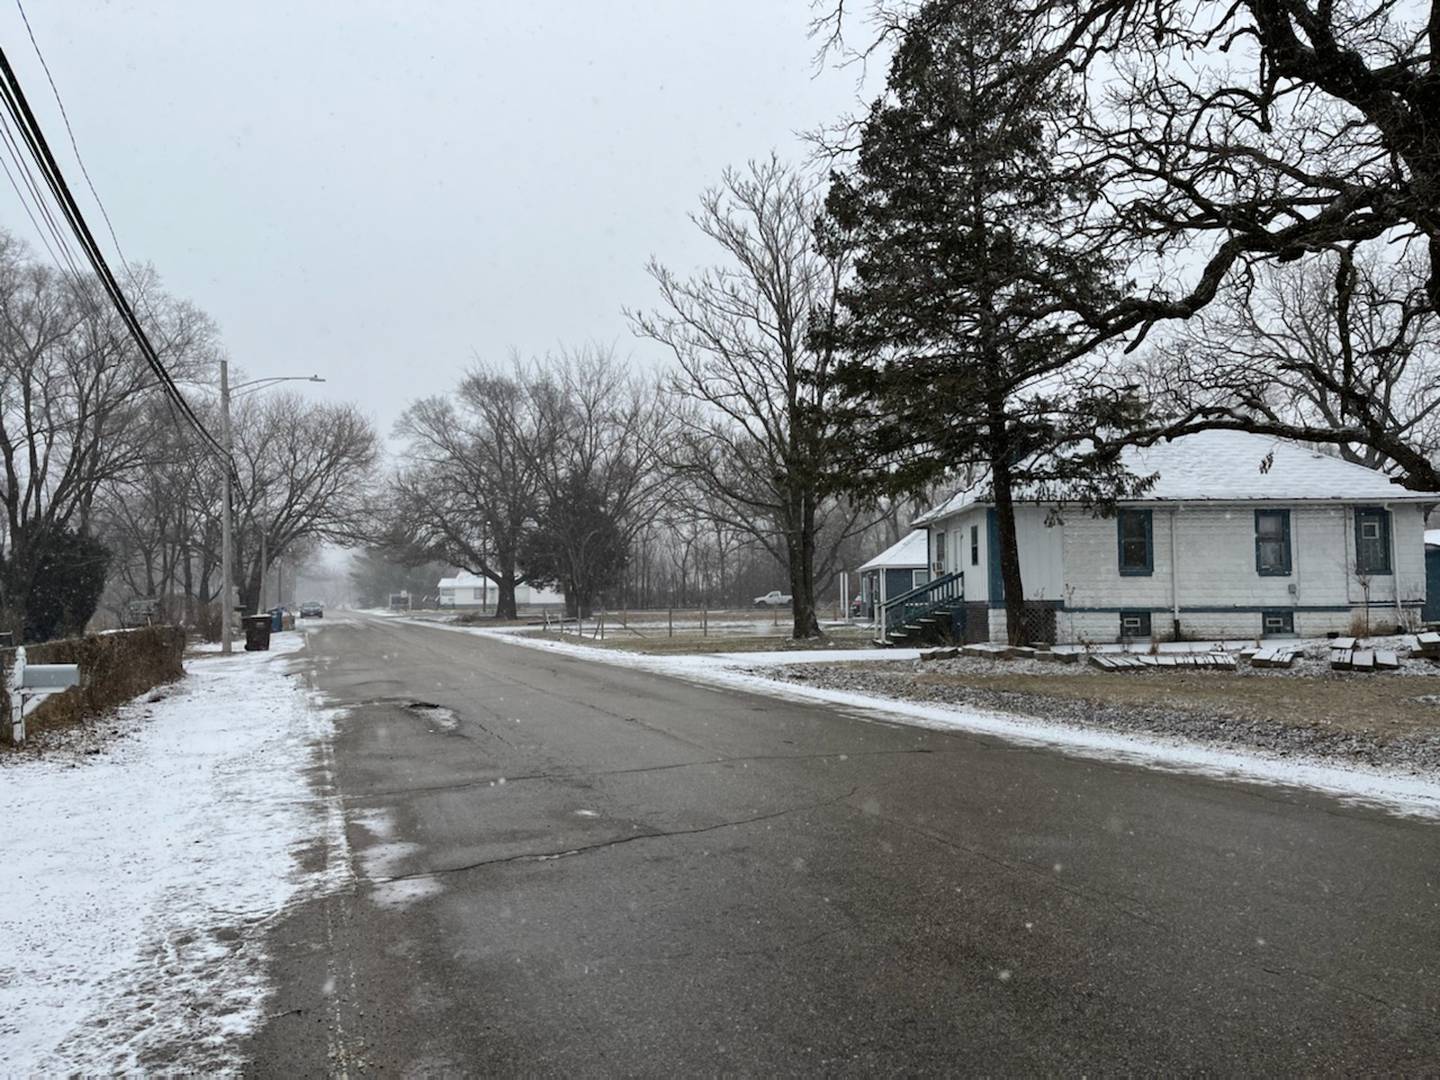 The eastern view of the 700 block of Patterson Road in Joliet Township seen on Thursday, Feb. 24, 2022. Will County Sheriff’s Office is investigating human remains found on Wednesday, Feb. 23, 2022 in a wooded area north of the roadway.